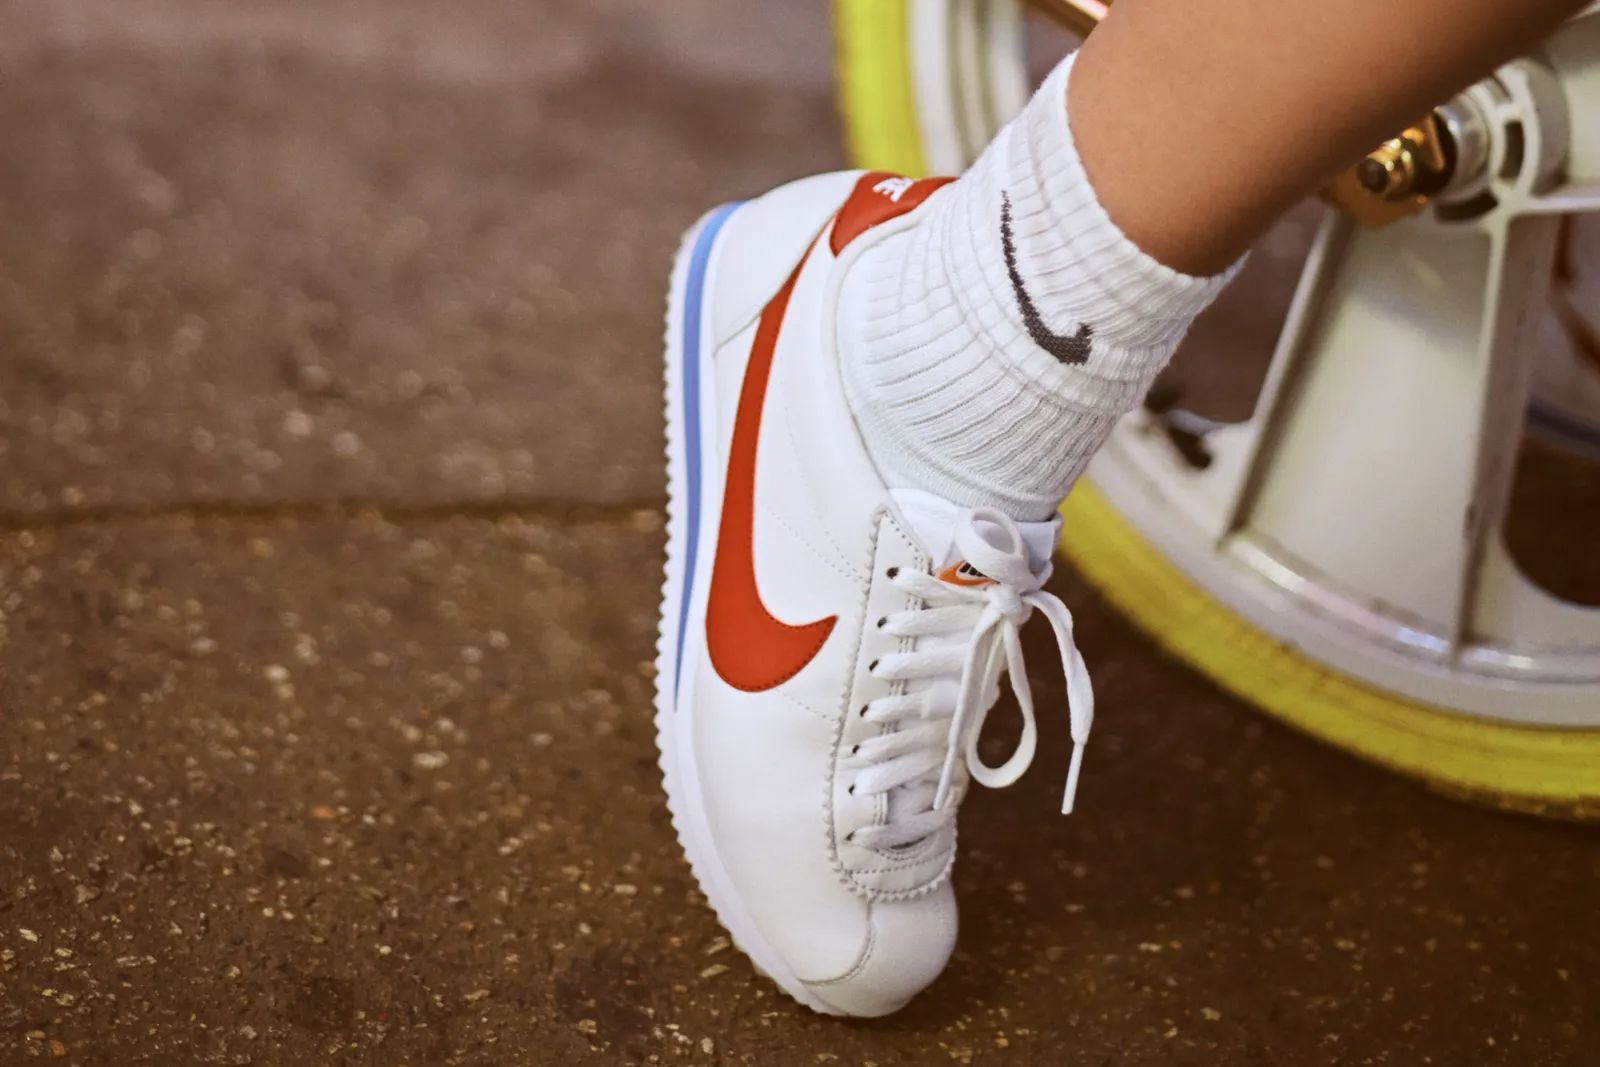 Nike Bring Back The Cortez Women's In Signature Red, White and Blue - Sneaker Freaker